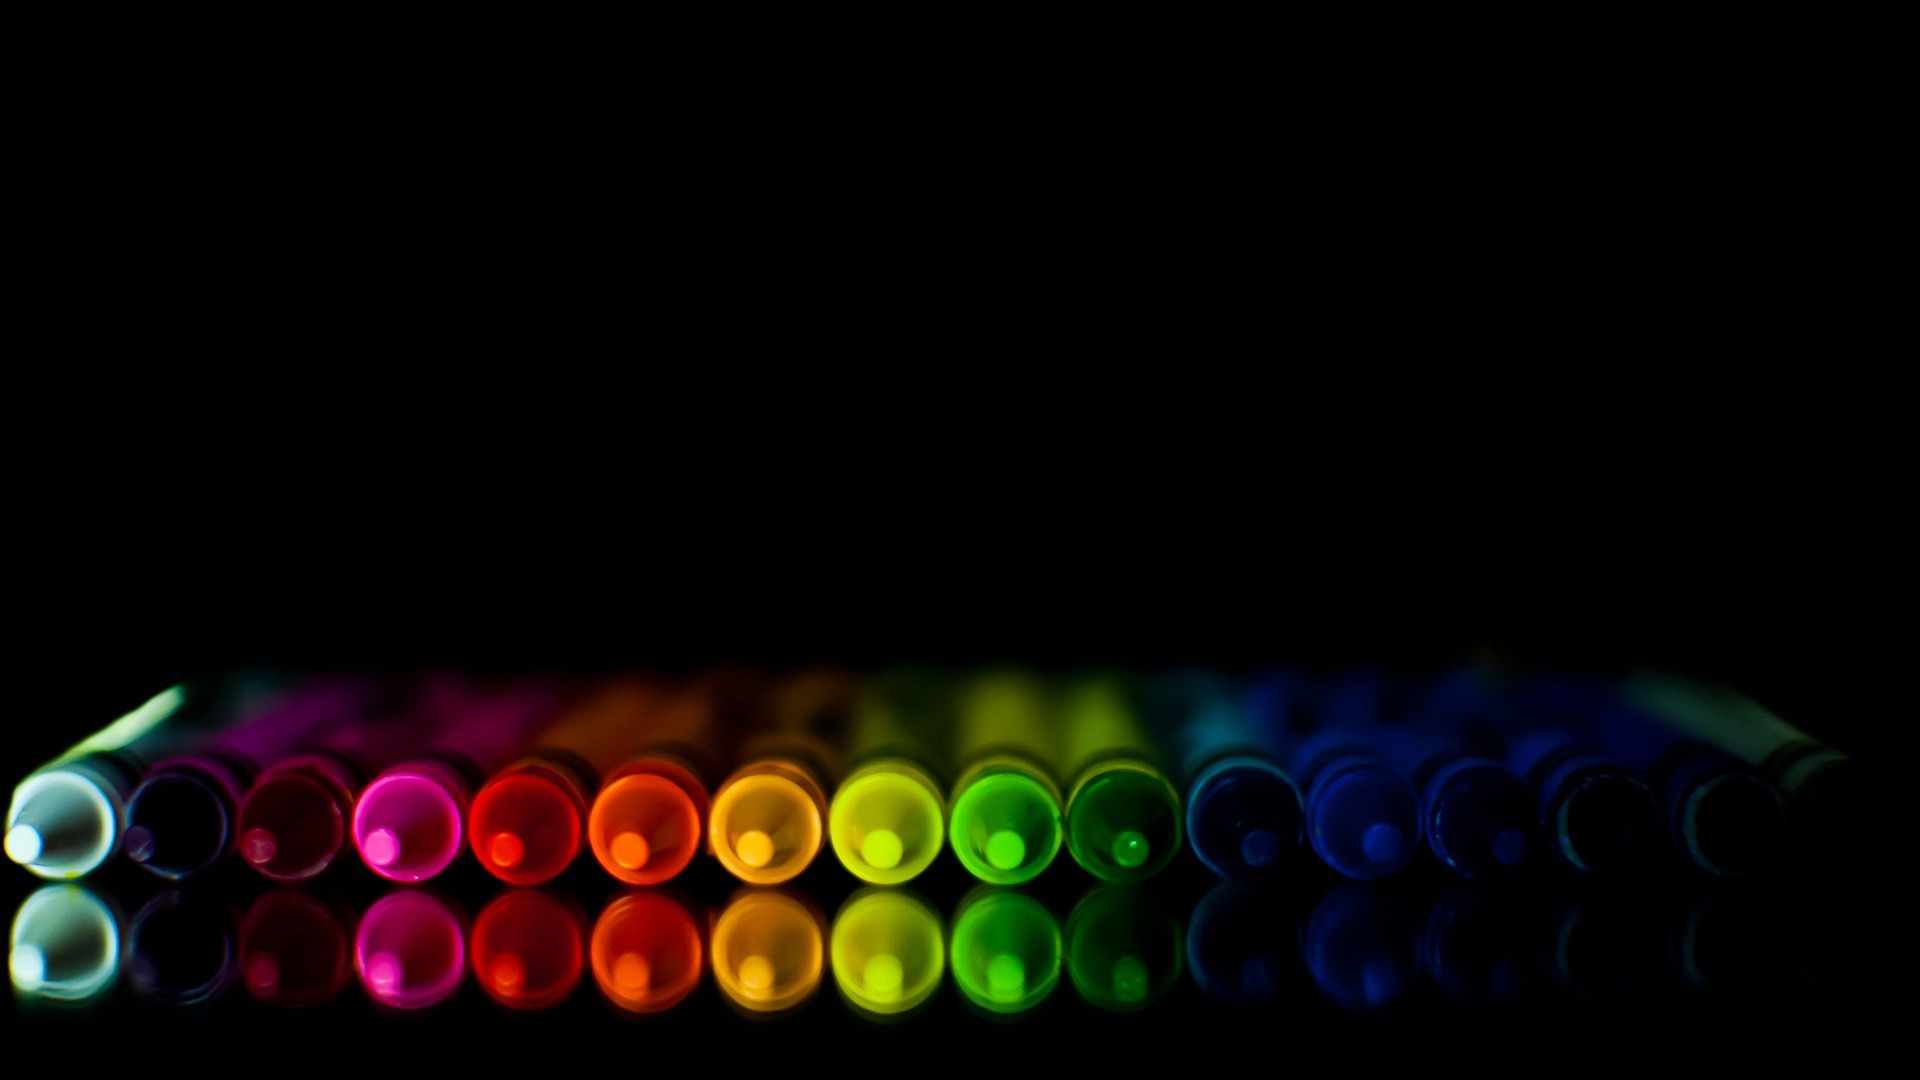 Crayons for 1920 x 1080 HDTV 1080p resolution